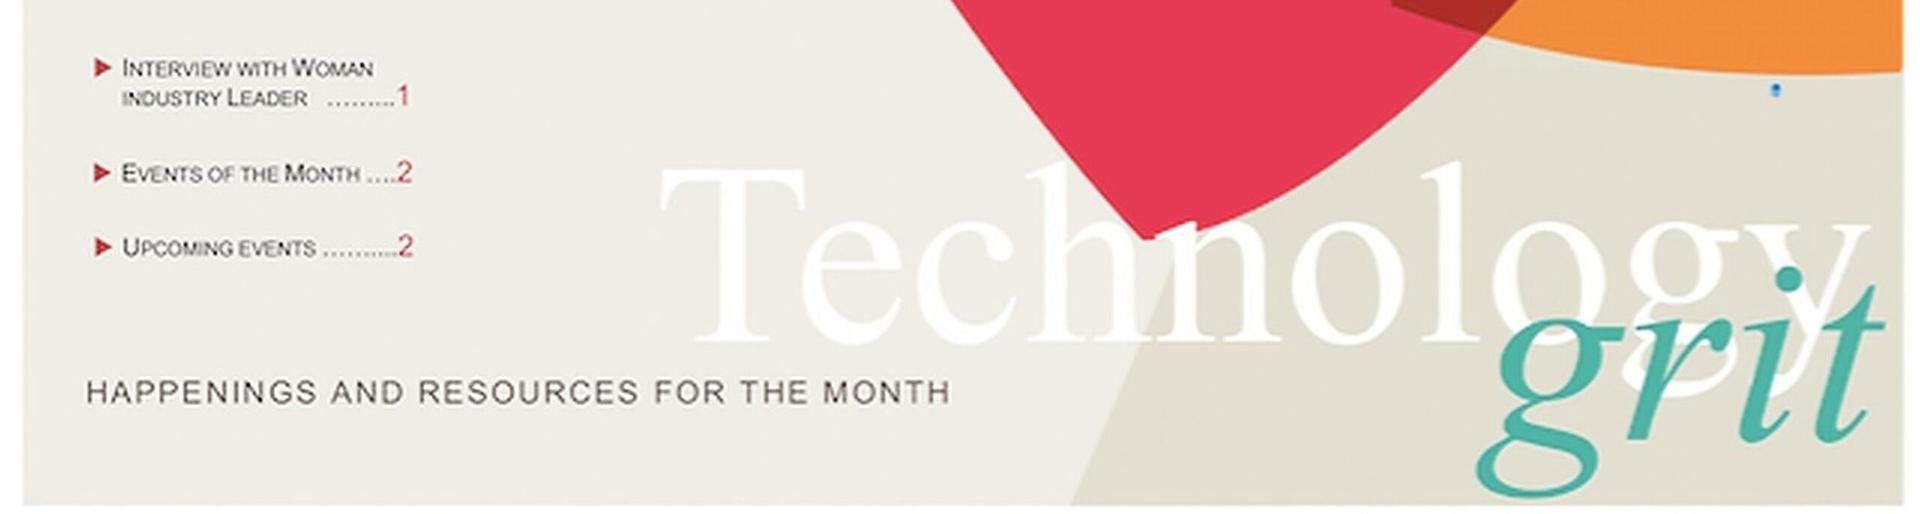 Featured image for April Technology Grit: Never Stop Learning or Reinventing Yourself